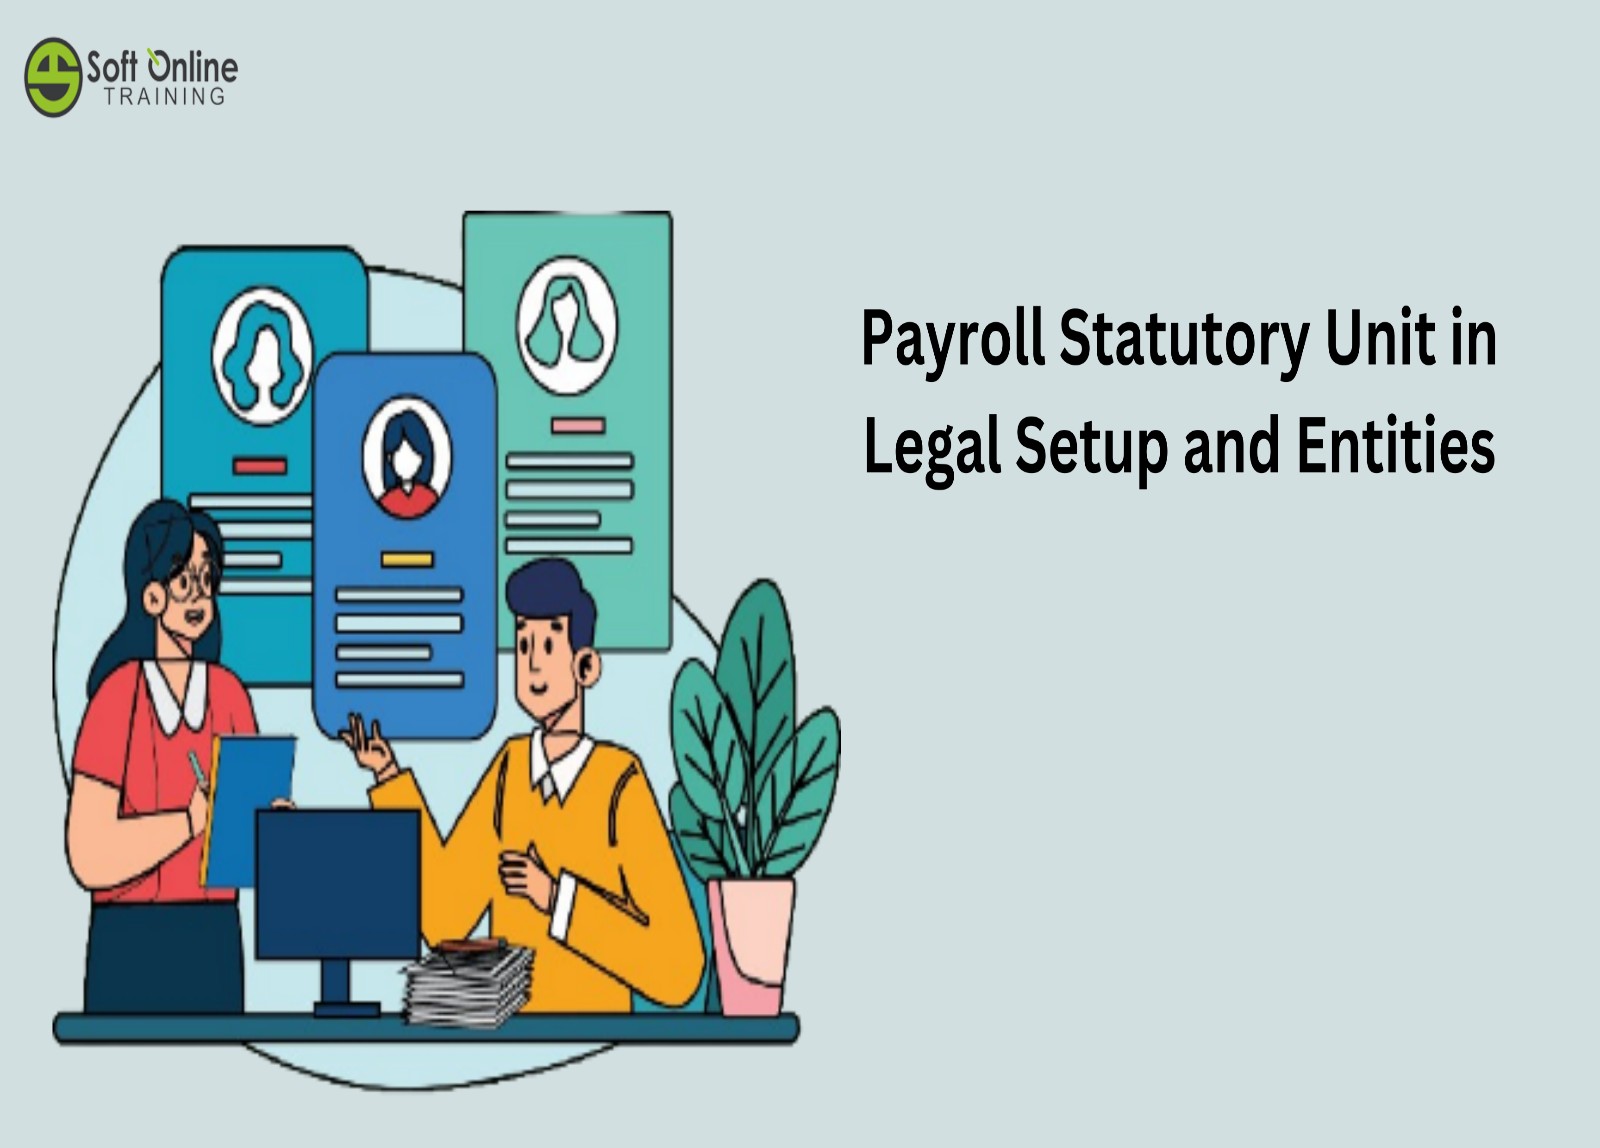 Payroll Statutory Unit in Legal Setup and Entities